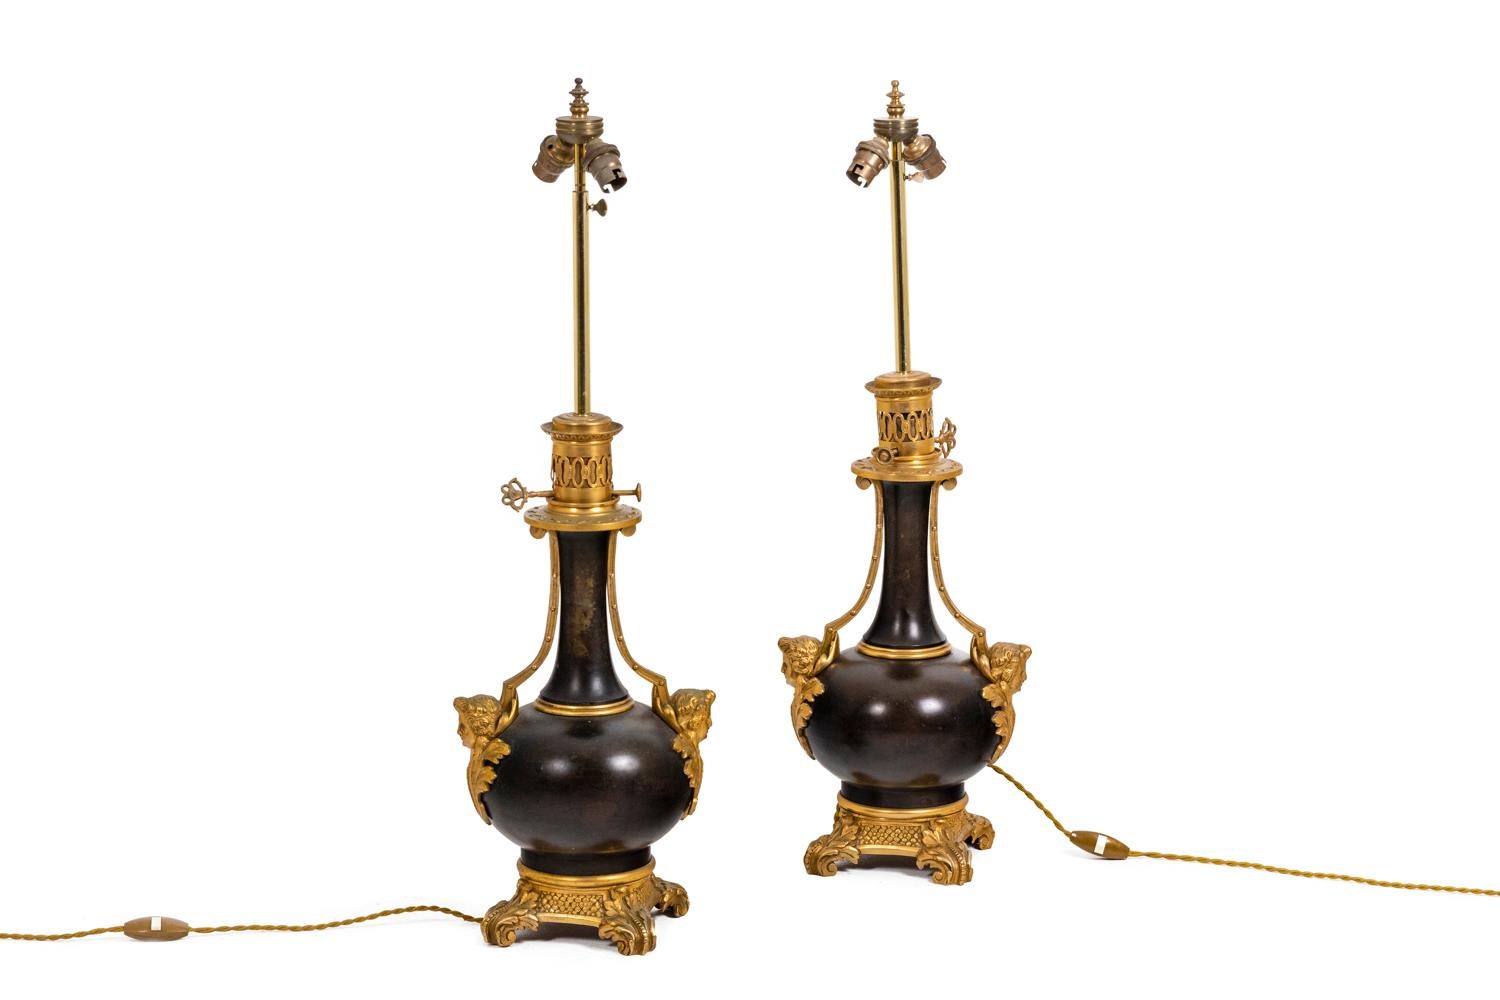 Pair of lamps in plate and gilt bronze of baluster shape of brown green color. Chiseled and gilt bronze mount. Decor of cherubs adorned with acanthus leaves on the neck, on each side of the lamp. Quadripod square base adorned with acanthus leaves.